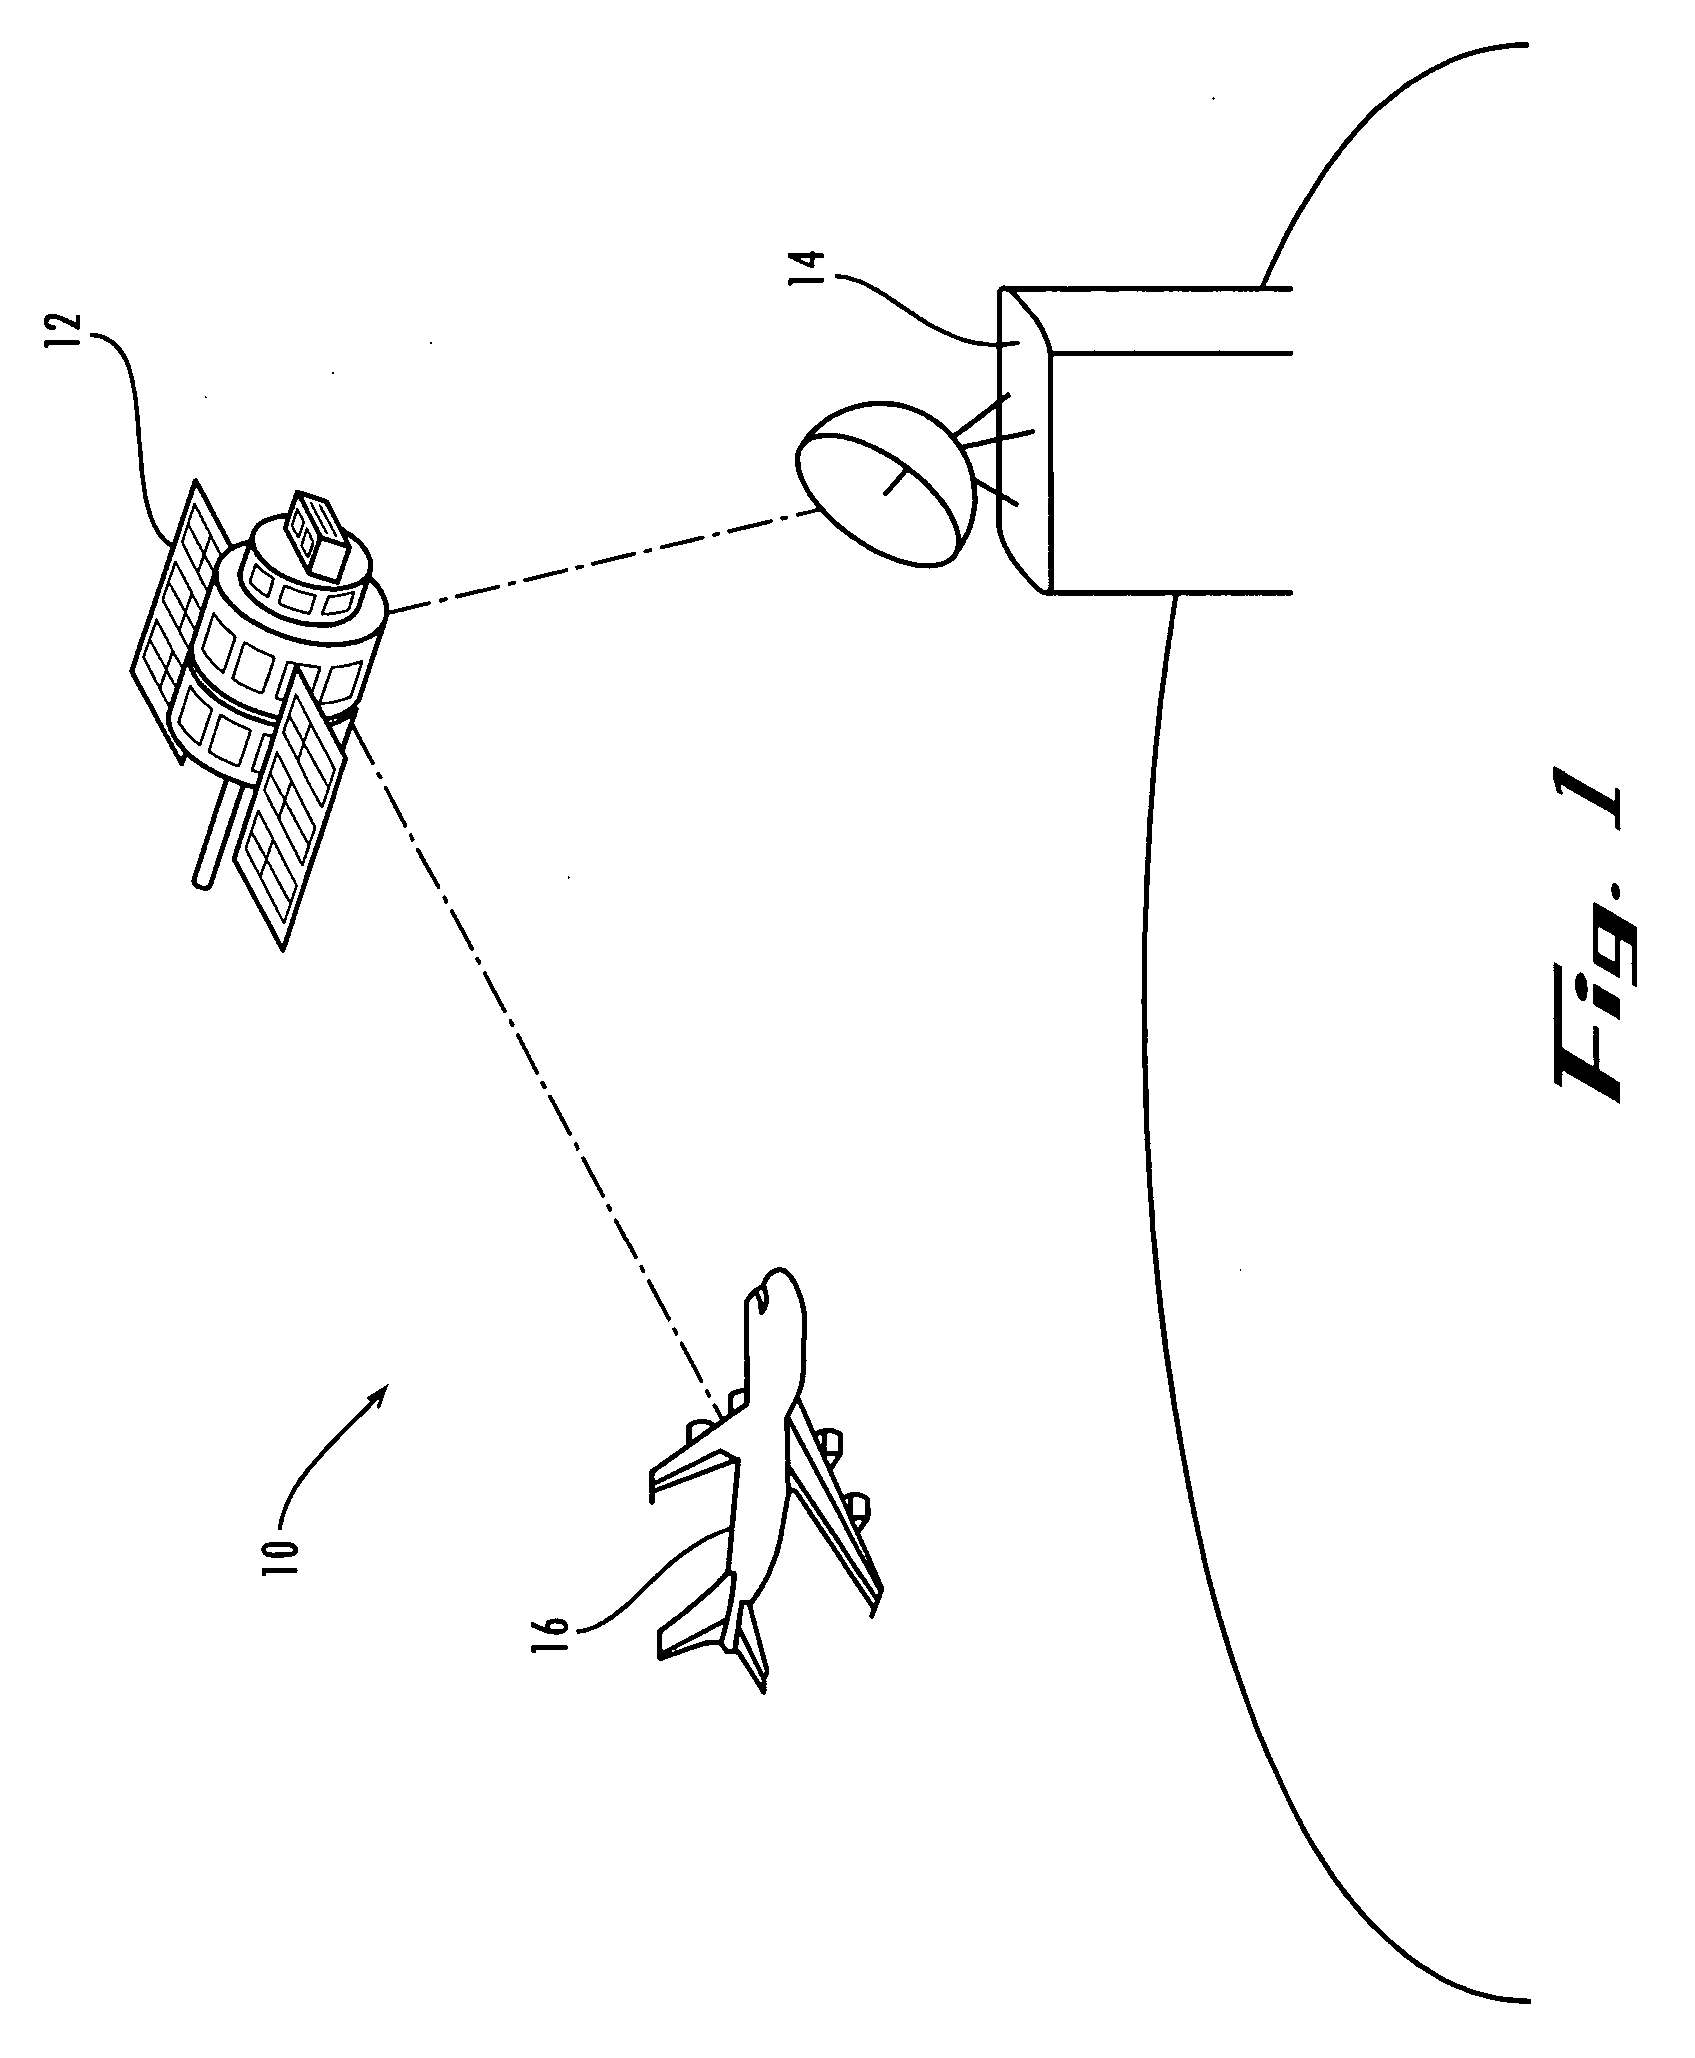 Dielectric-resonator array antenna system